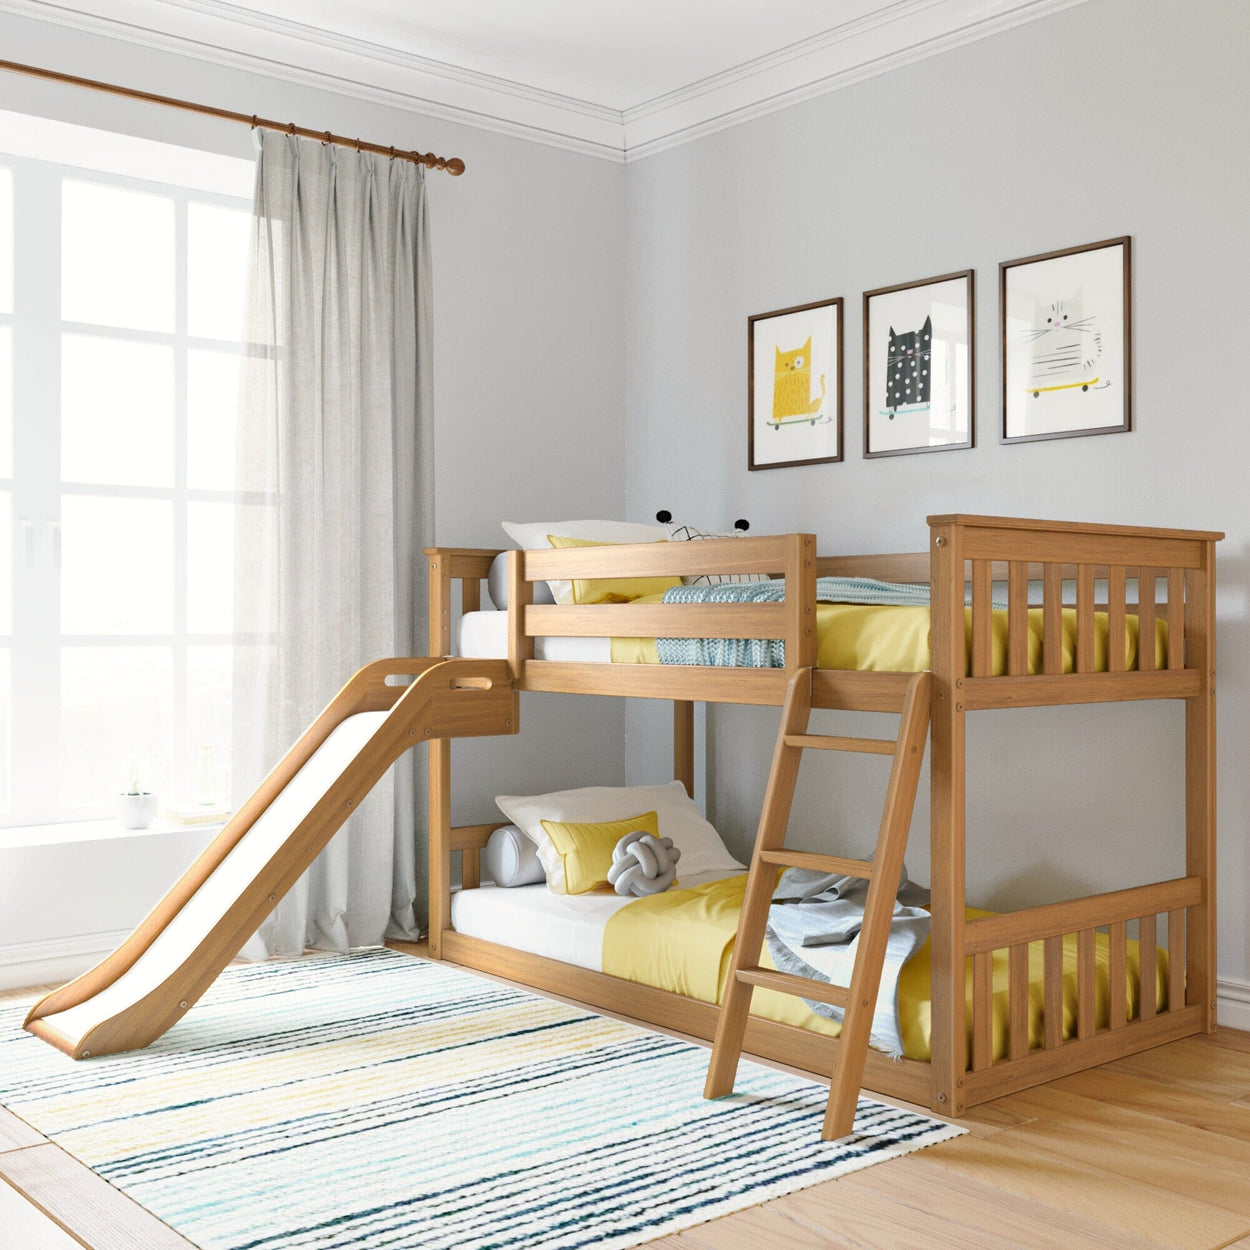 180417-007 : Bunk Beds Max & Lily Twin Size Low Loft Bed with Slide and Ladder, Classic Solid Wood Kids Bedroom Furniture, 400 lbs Weight Capacity, 14" Safety Guardrail, Anti-Slip Steps, Pecan